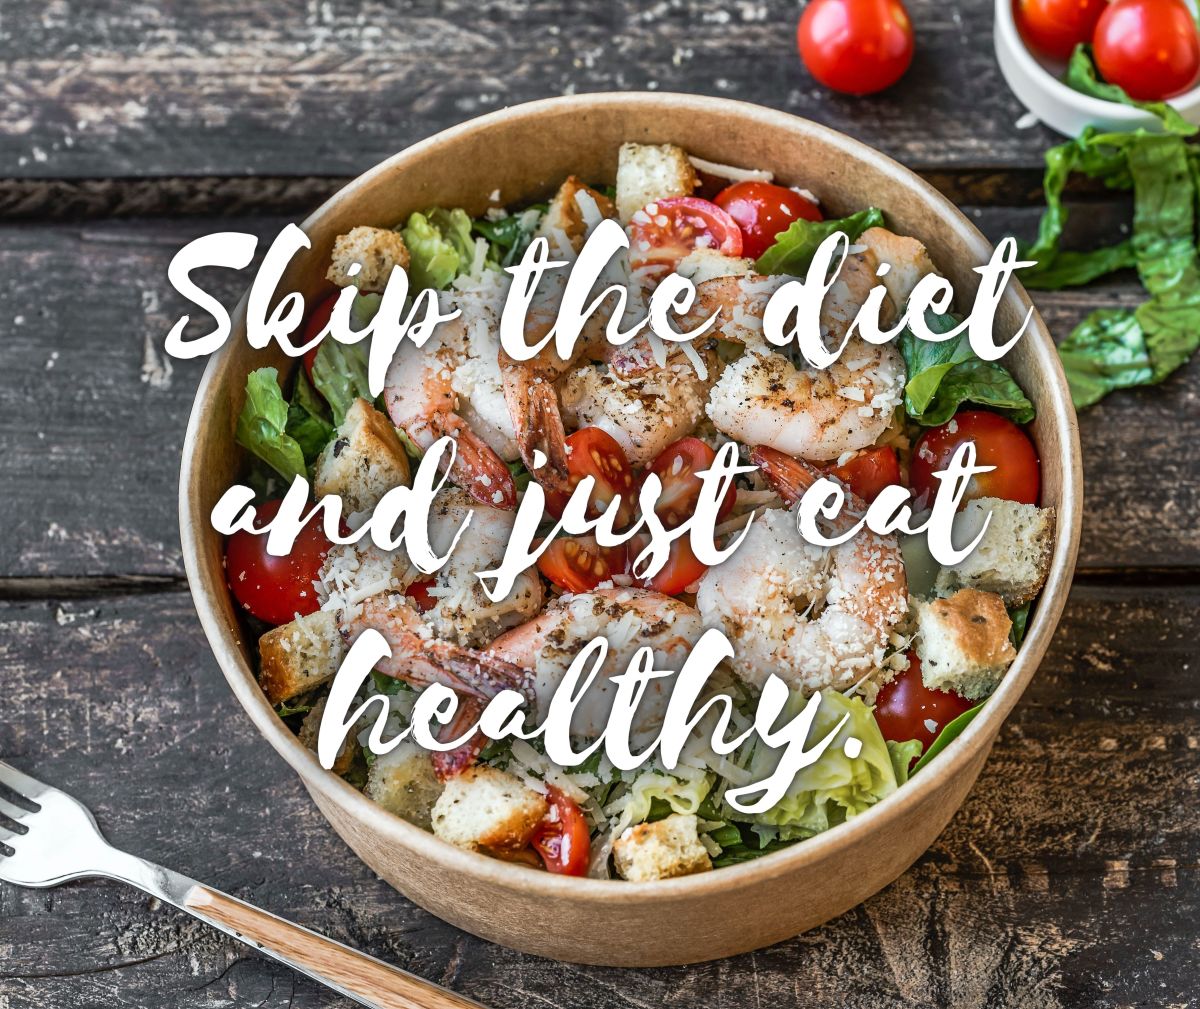 salad-quotes-and-caption-ideas